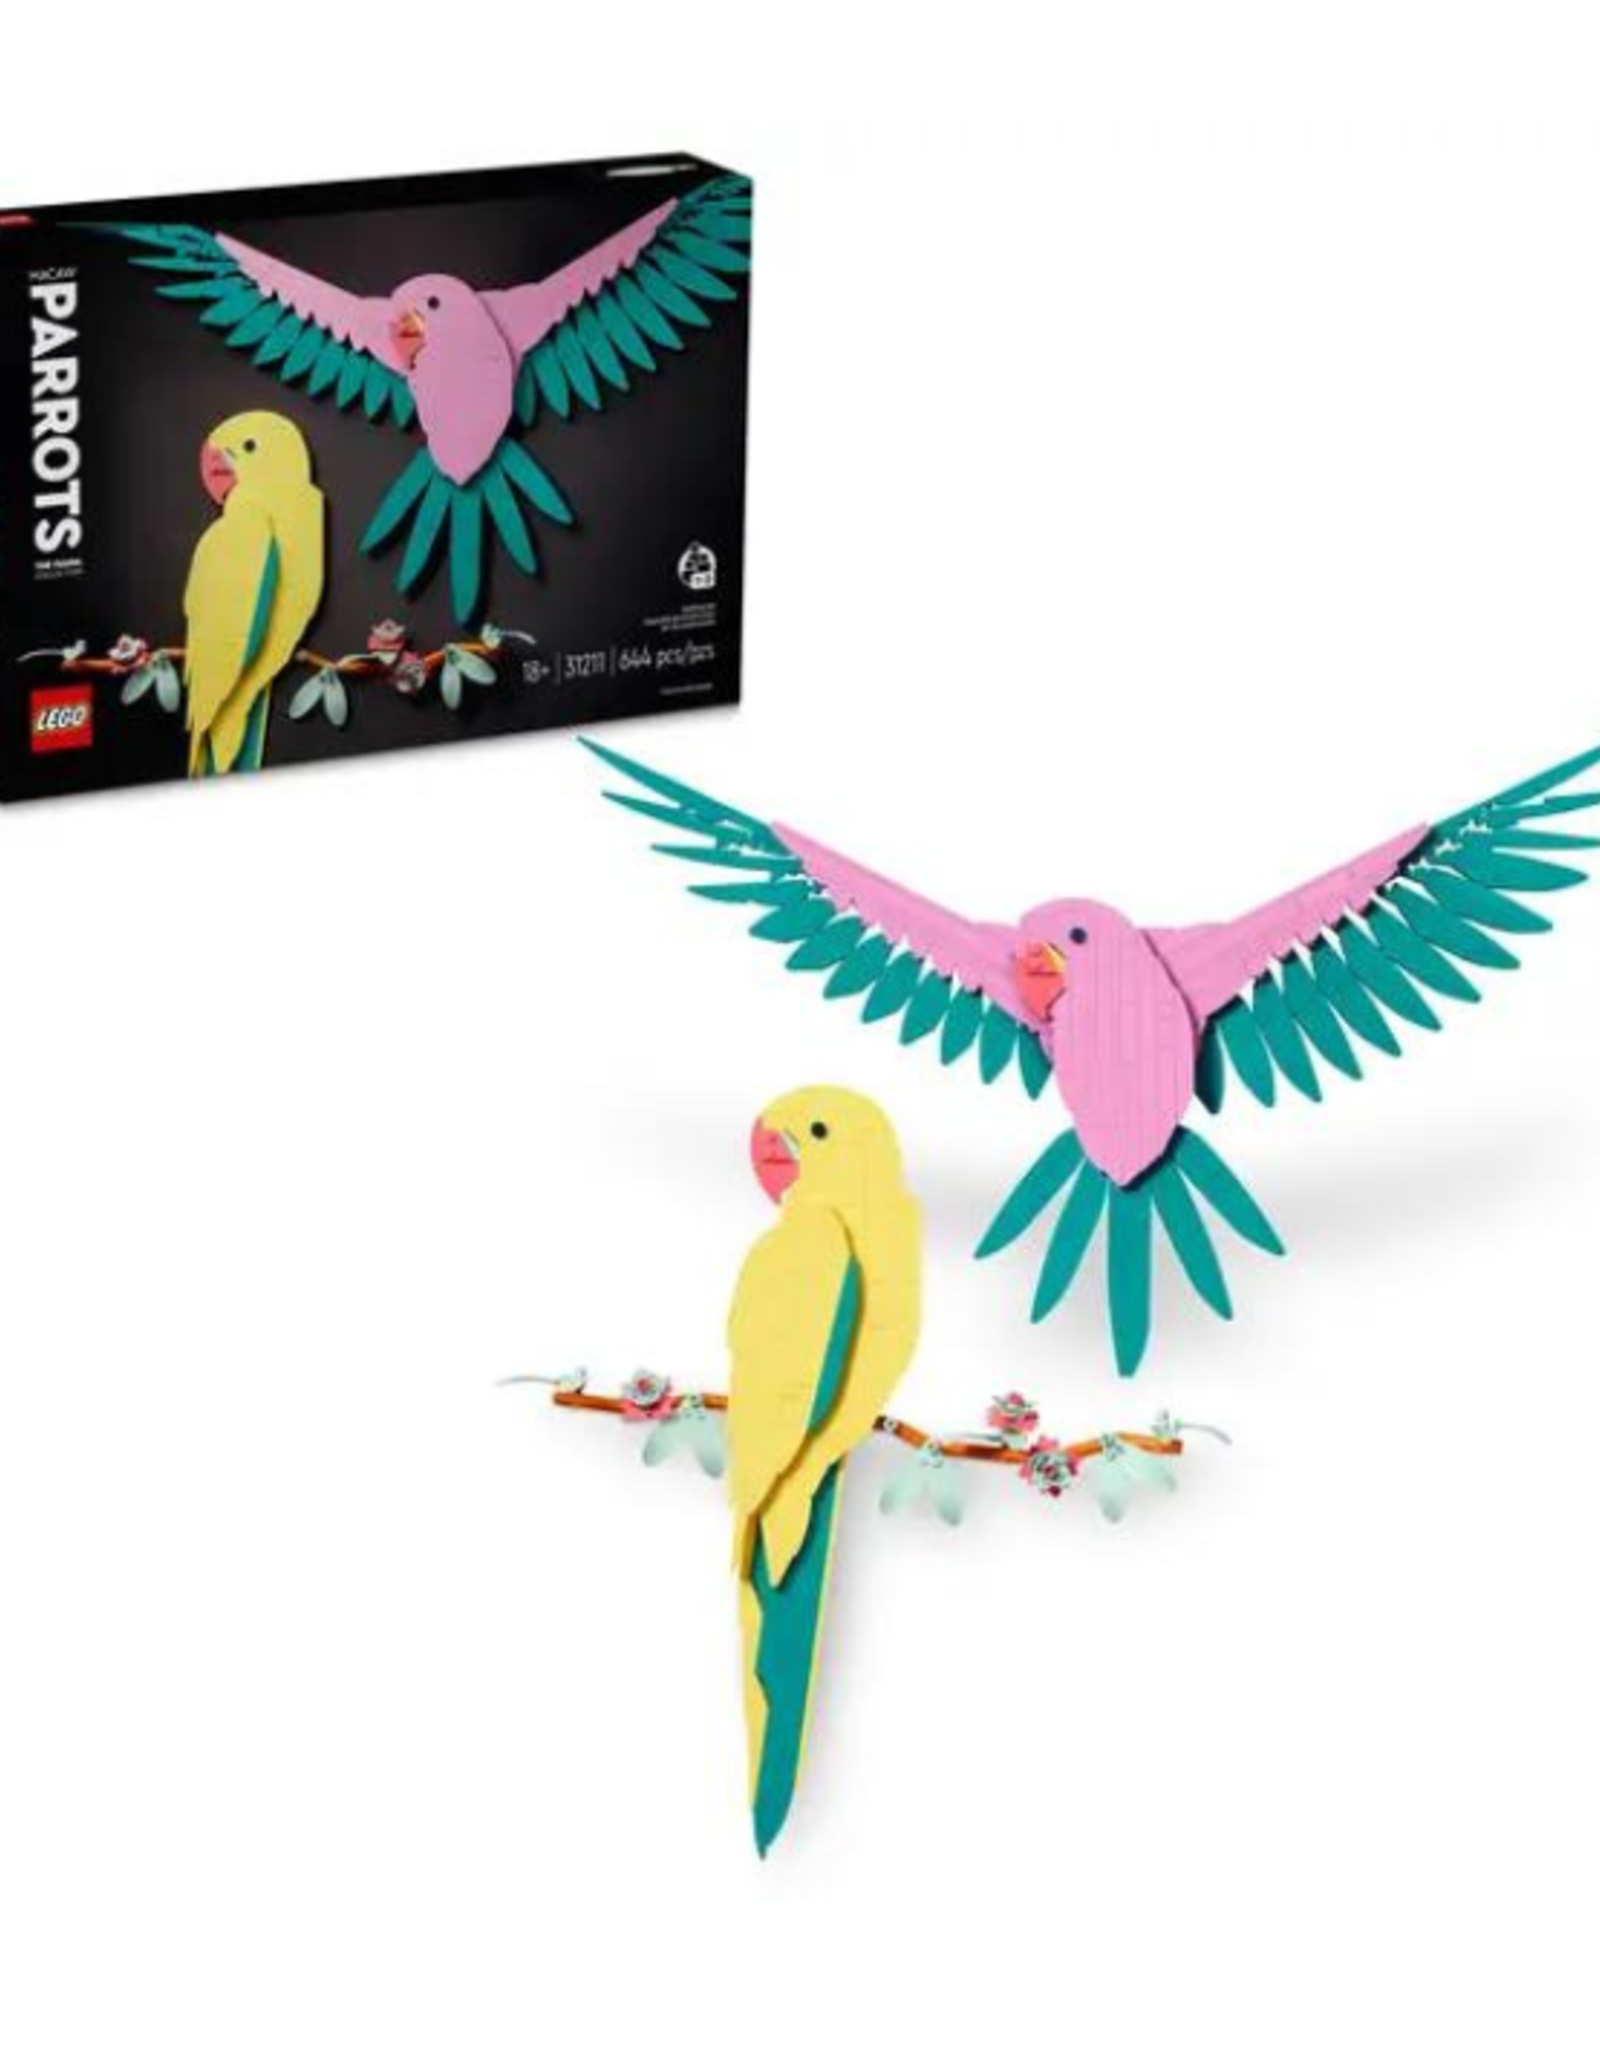 Lego Lego - Art - 31211 - The Fauna Collection – Macaw Parrots